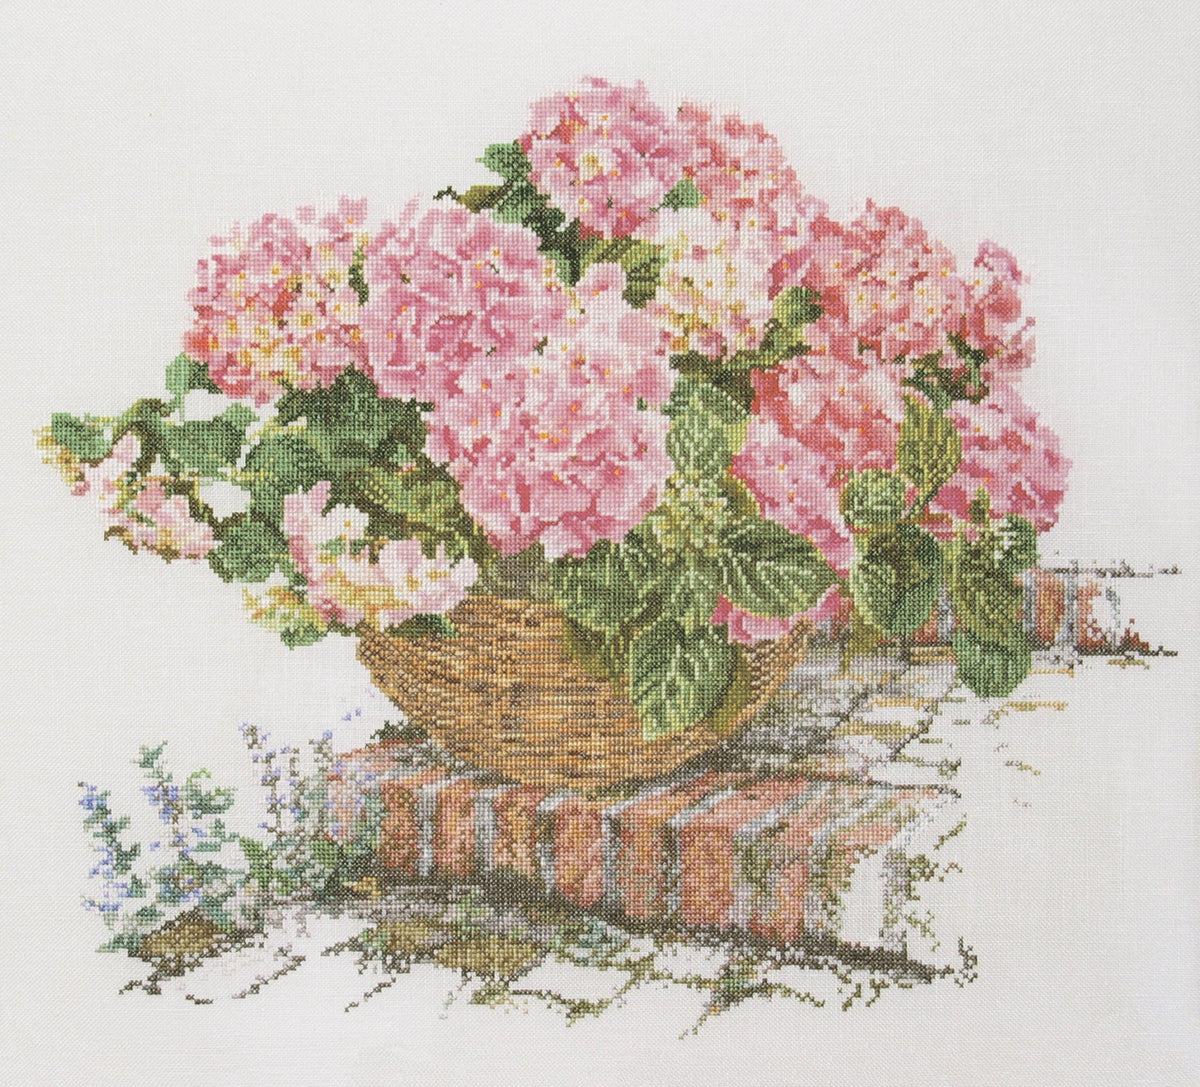 Thea Gouverneur - Counted Cross Stitch Kit - Pink Hydrangea - Aida - 16 count - 2047A - Thea Gouverneur Since 1959